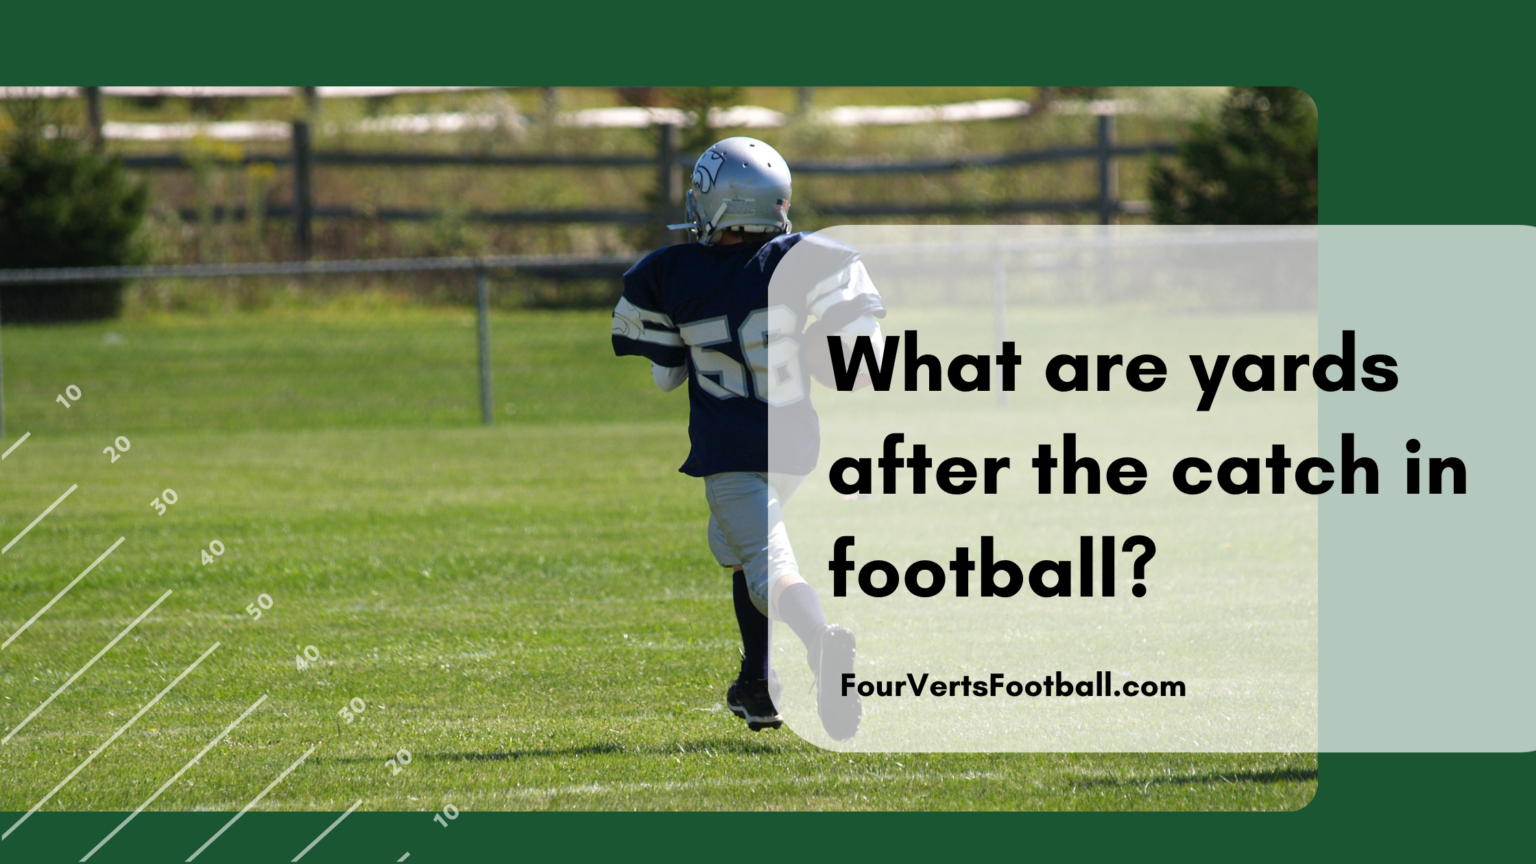 What are yards after the catch in football? Four Verts Football